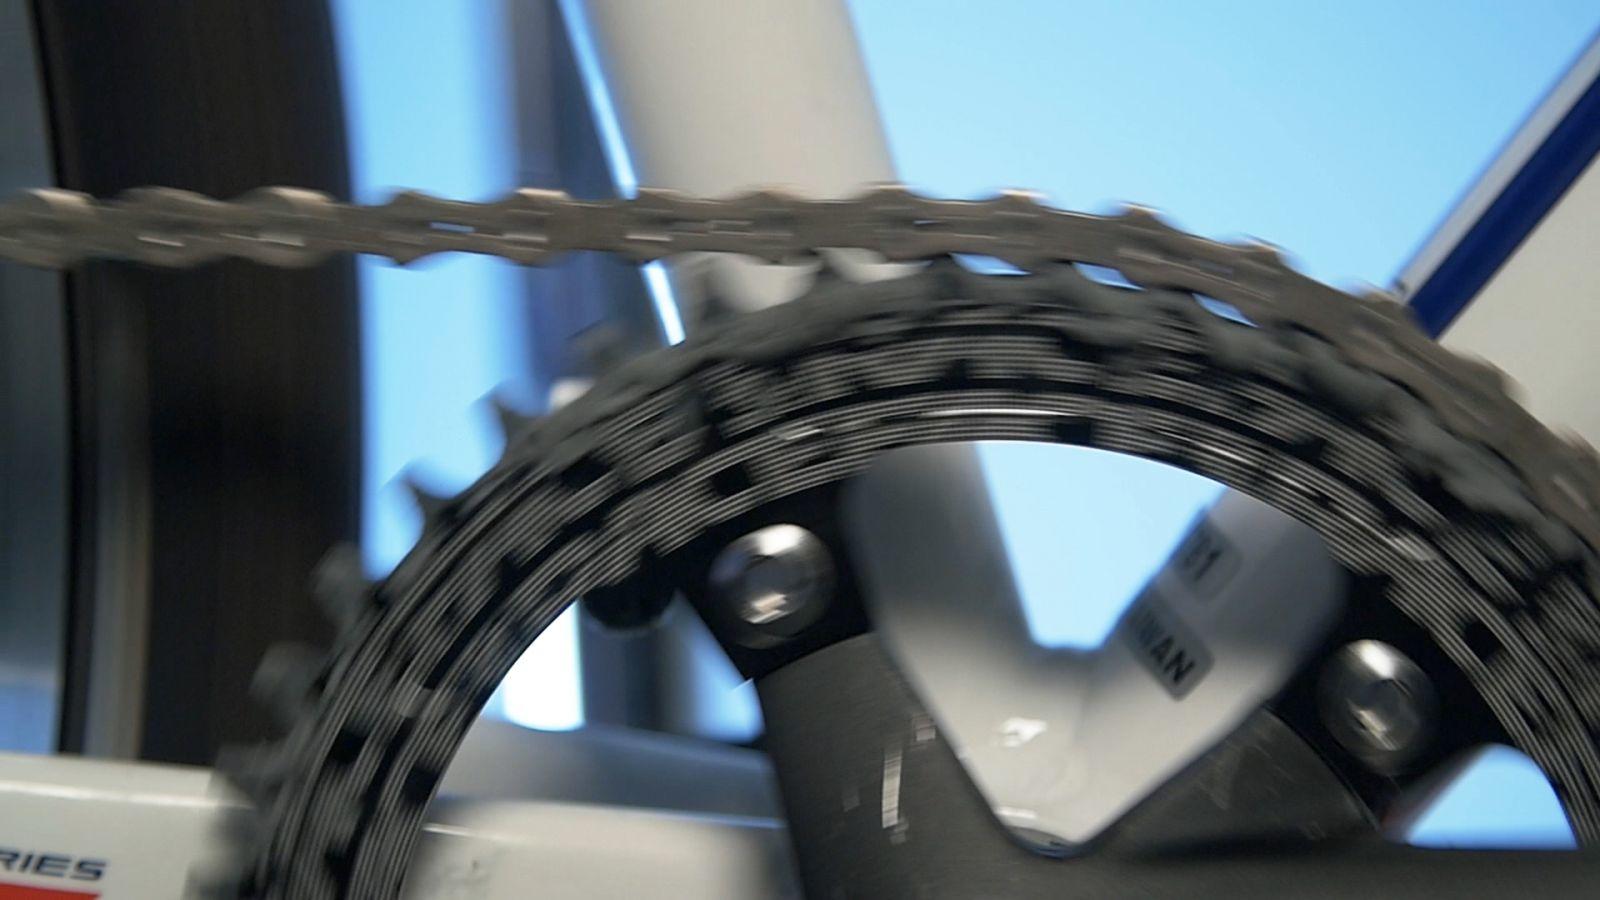 Roller rise can be seen by gap between the chain and top of chainring